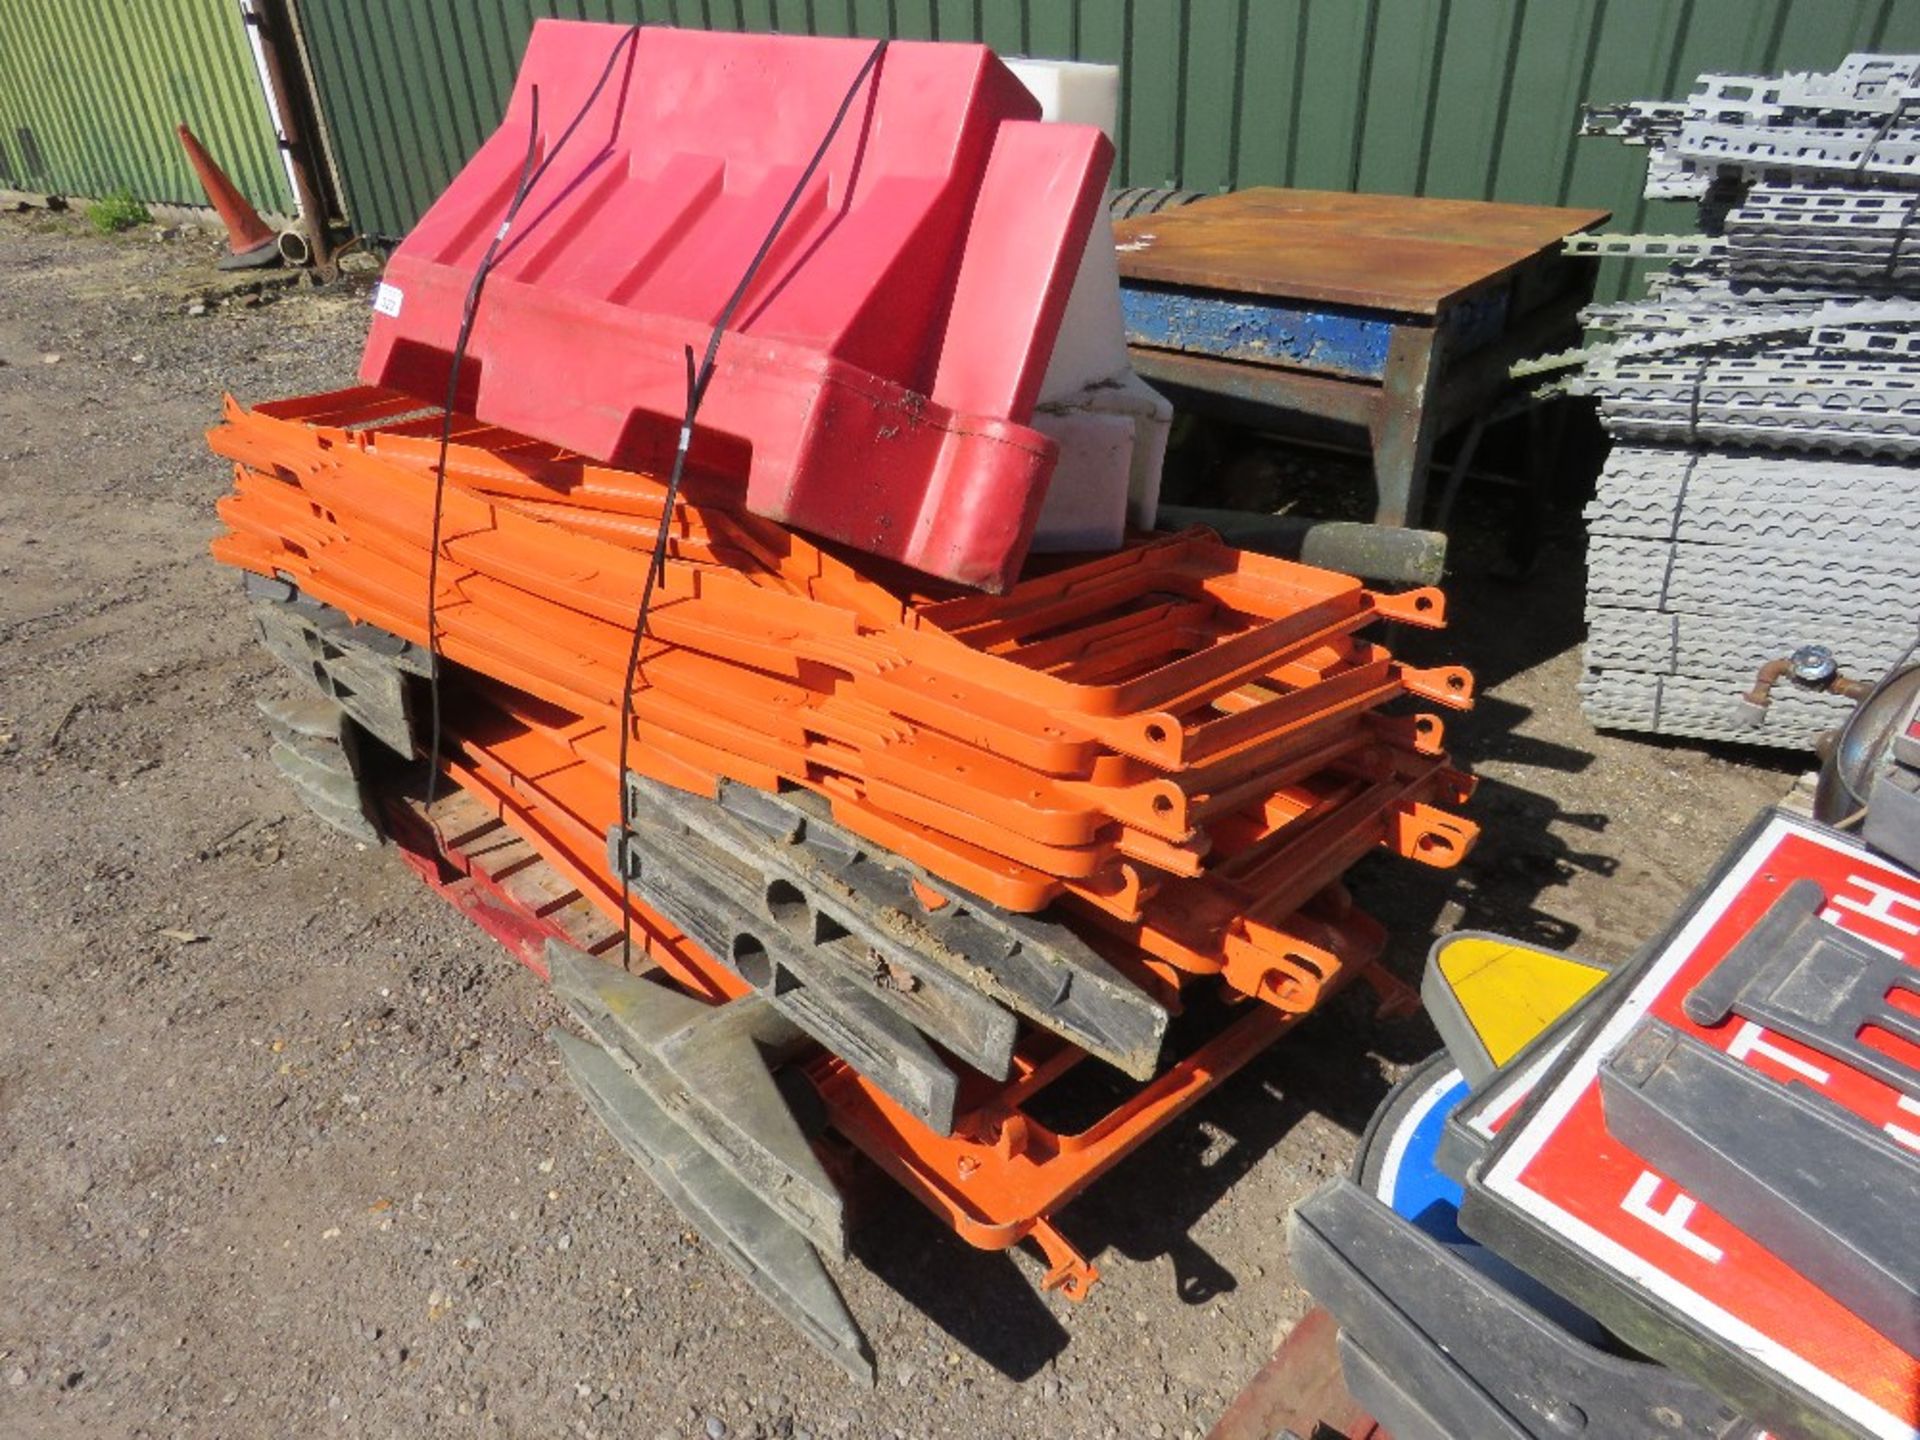 9NO CHAPTER 8 PLASTIC BARRIERS PLUS 2NO WATER FILLED BARRIERS. THIS LOT IS SOLD UNDER THE AUCTION - Image 2 of 4